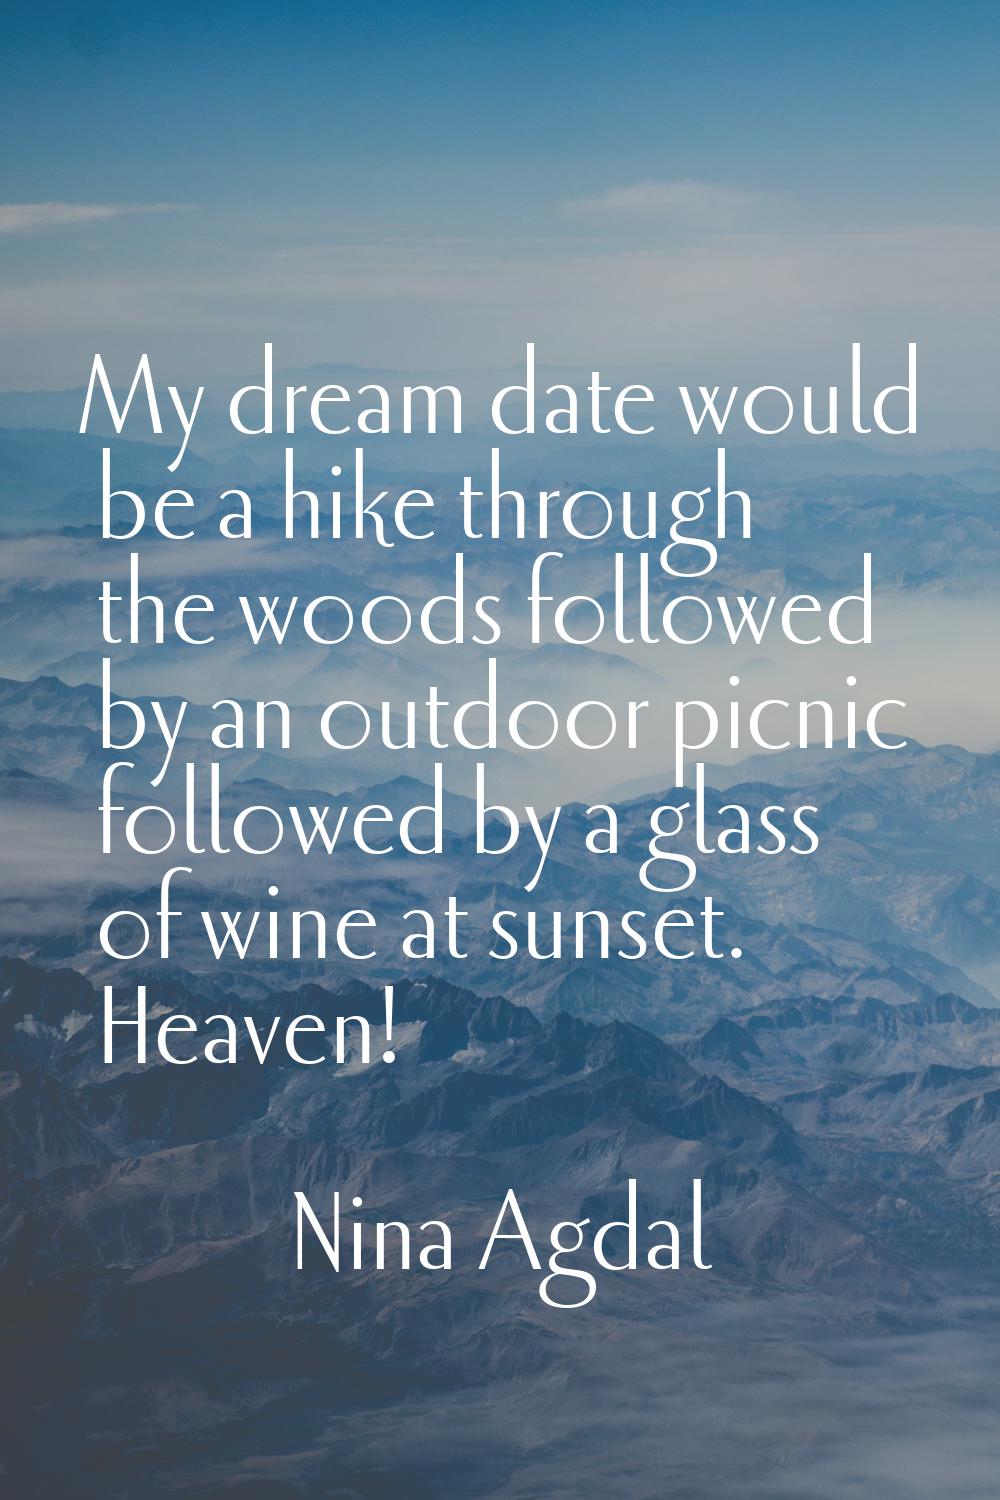 My dream date would be a hike through the woods followed by an outdoor picnic followed by a glass o